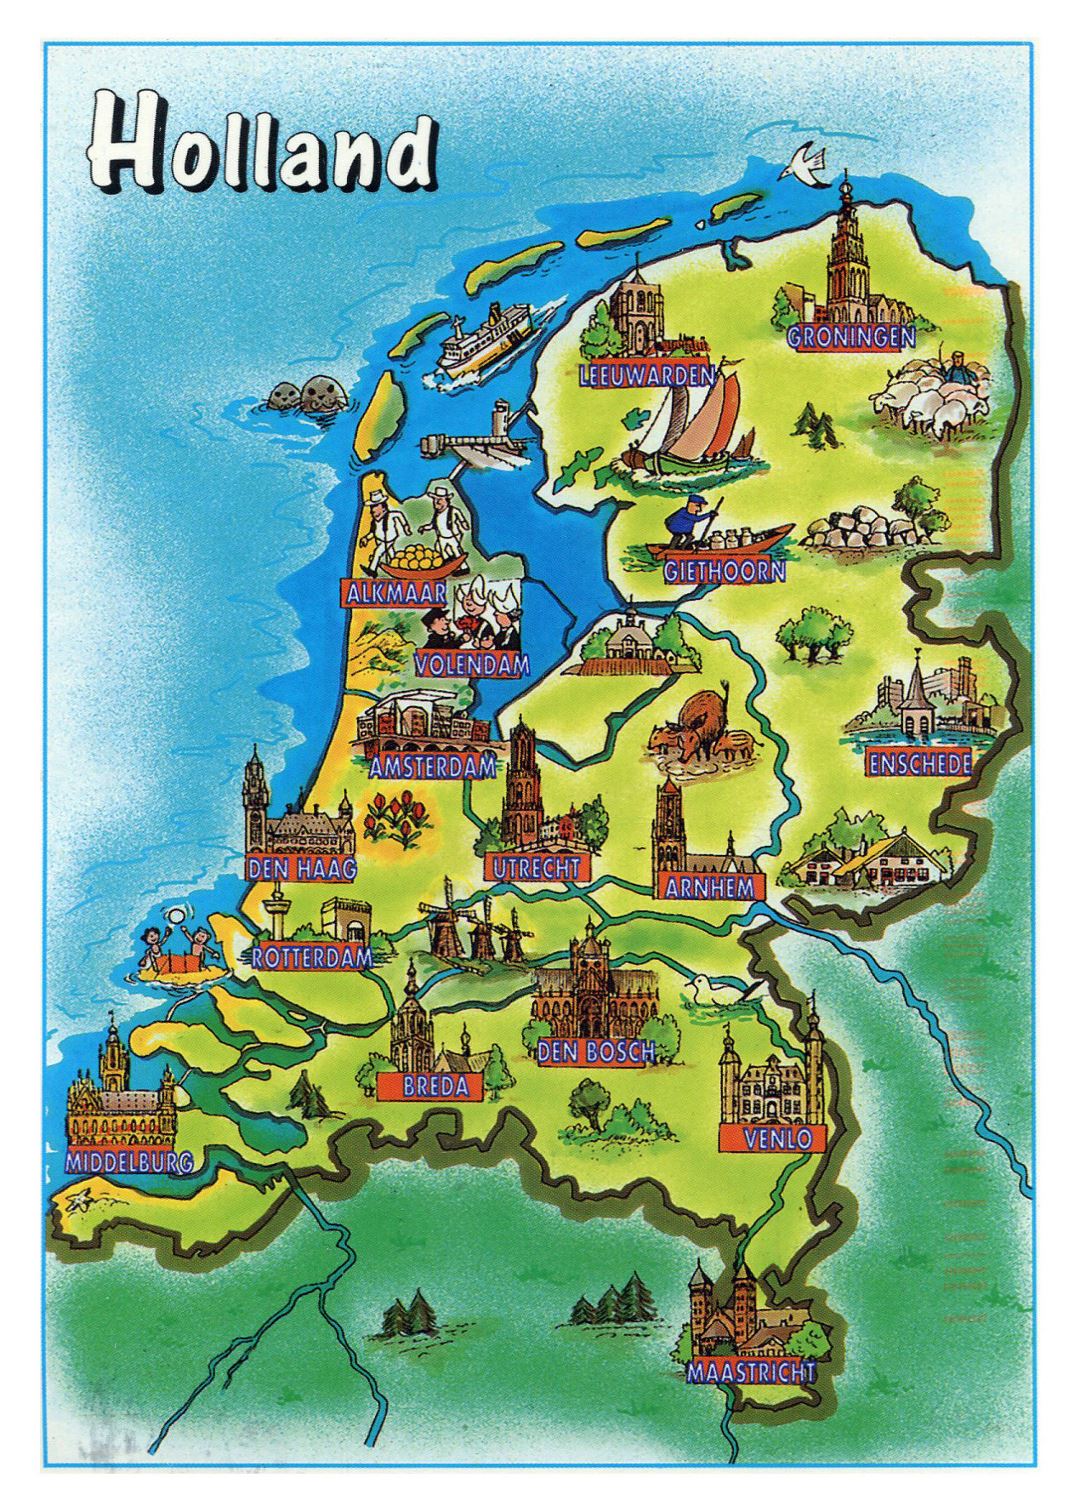 Large tourist illustrated map of Netherlands (Holland)